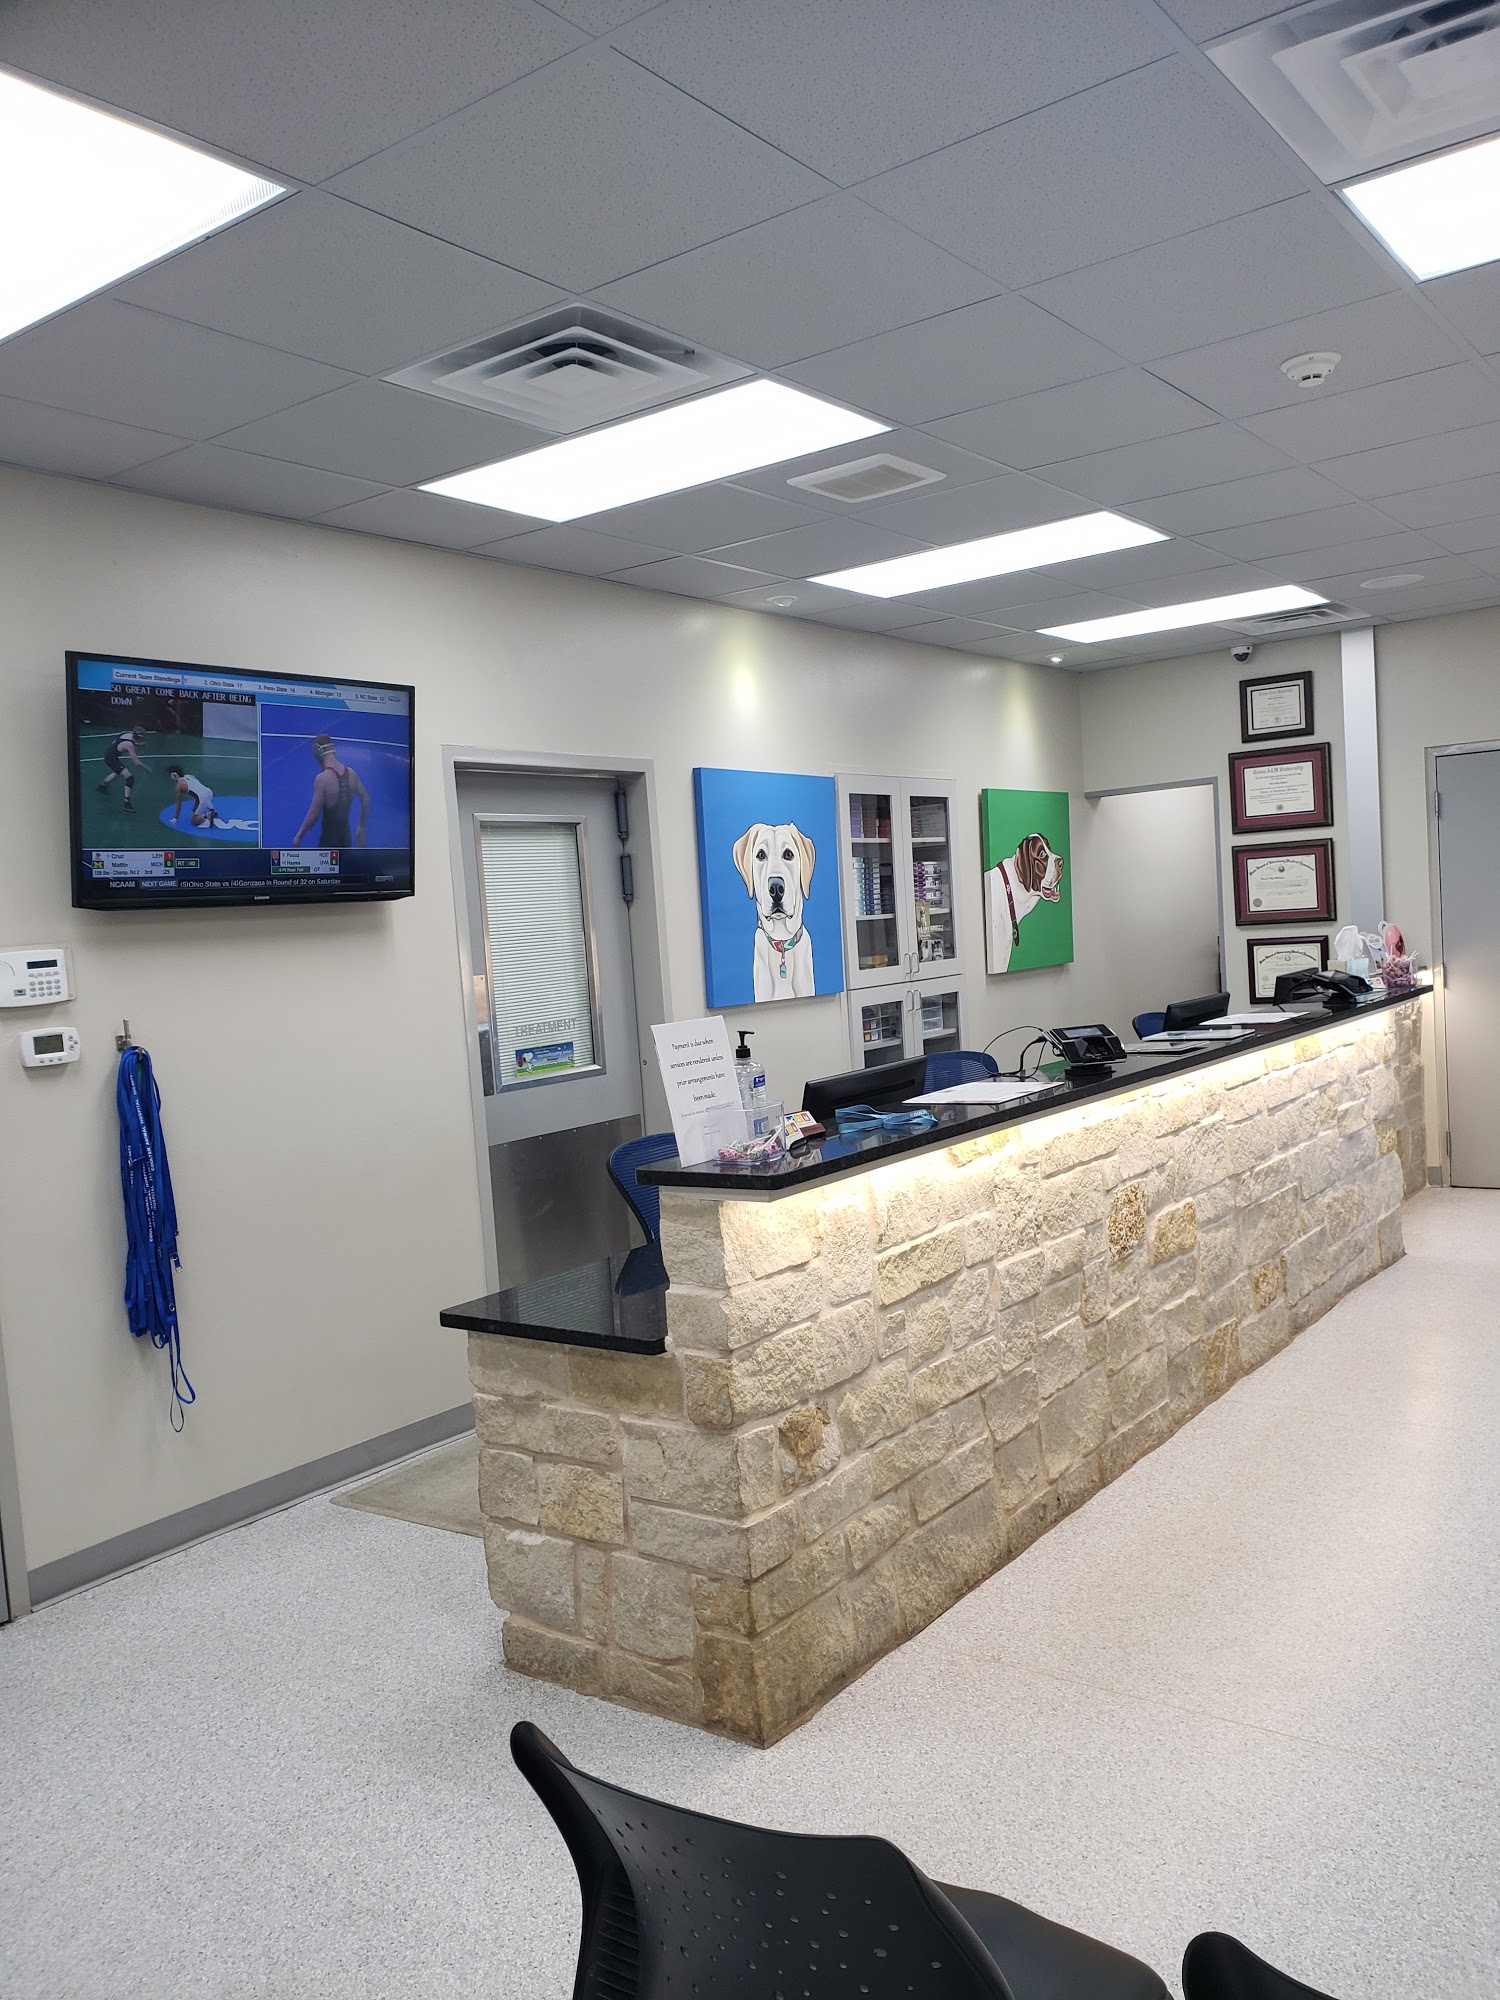 Coulter Animal Hospital